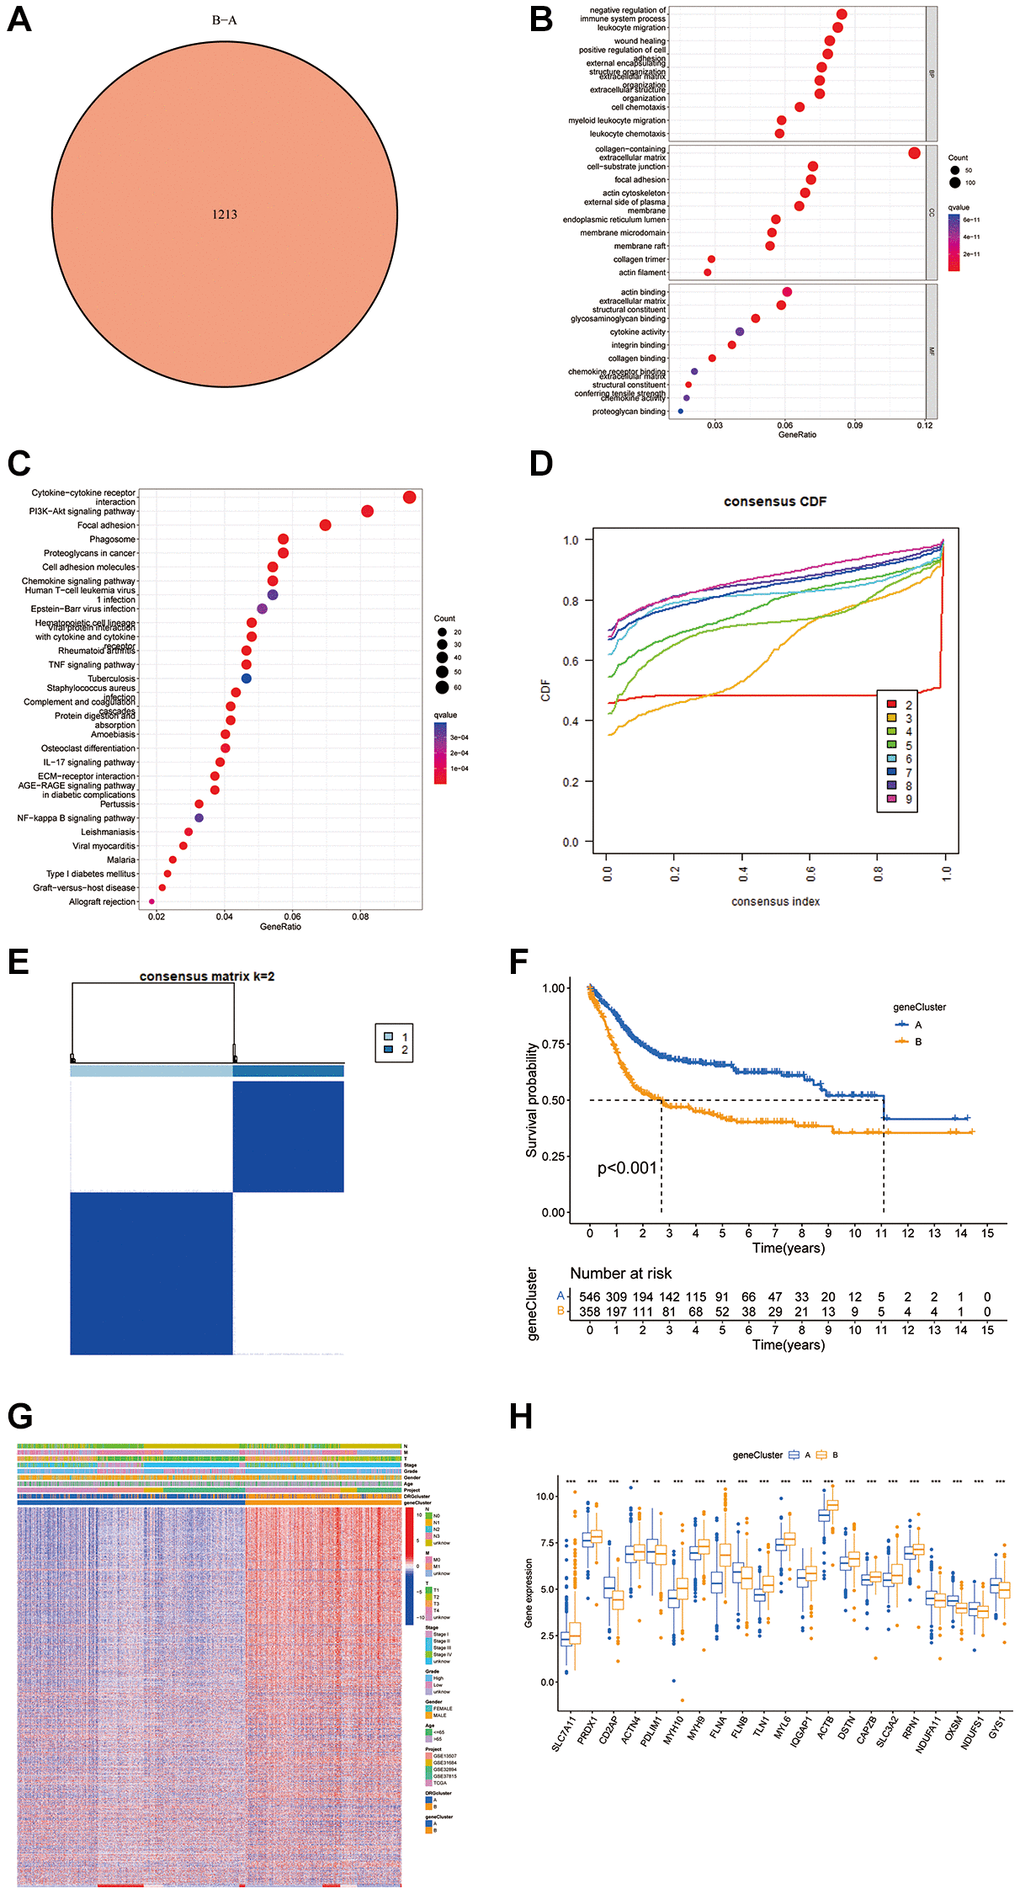 Analysis of DEGs and functional annotation of disulfidptosis. (A) DEGs between gene groups. (B, C) Functional annotation of DRG cluster-related DEGs using GO and KEGG enrichment analysis. (D) Cumulative distribution function curve. (E) Consistency matrix of BLCA sequences with k = 2. (F) Kaplan-Meier curves showed that the disulfidptosis genomic phenotype was significantly associated with OS of BLCA patients. (G) Unsupervised clustering of DEGs to classify patients into different genomic subtypes. (H) Expression of 26 DRGs in gene cluster A and B from the meta cohort. *P **P ***P 